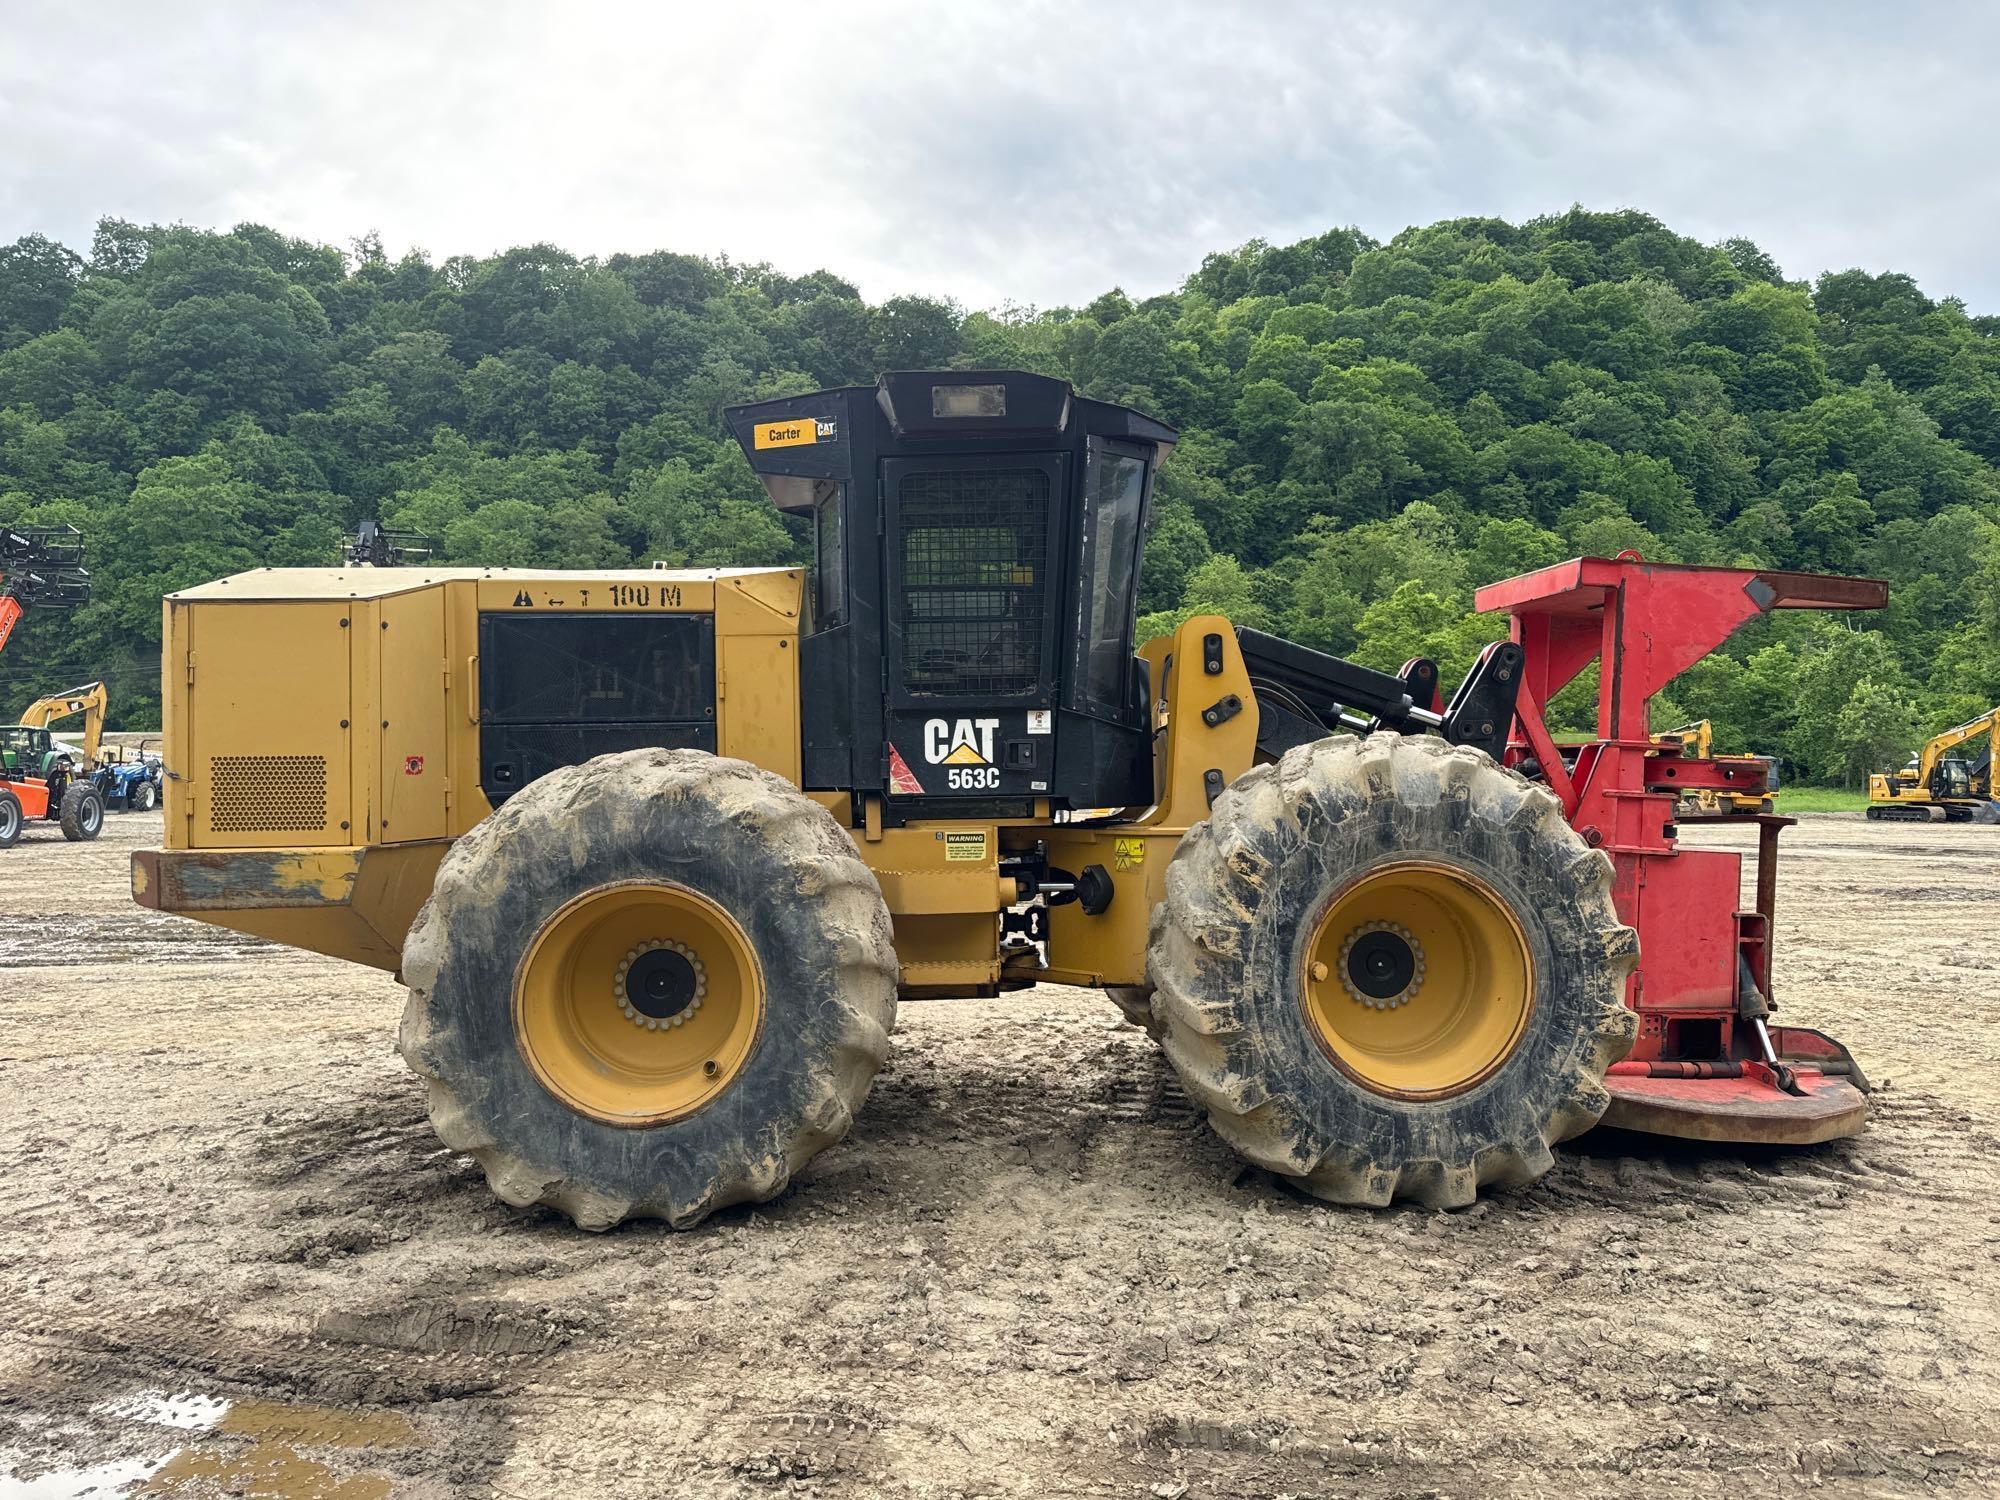 2015 CAT 563C FELLER BUNCHER SN:W6300188 powered by Cat C7.1 ACERT diesel engine, equipped with